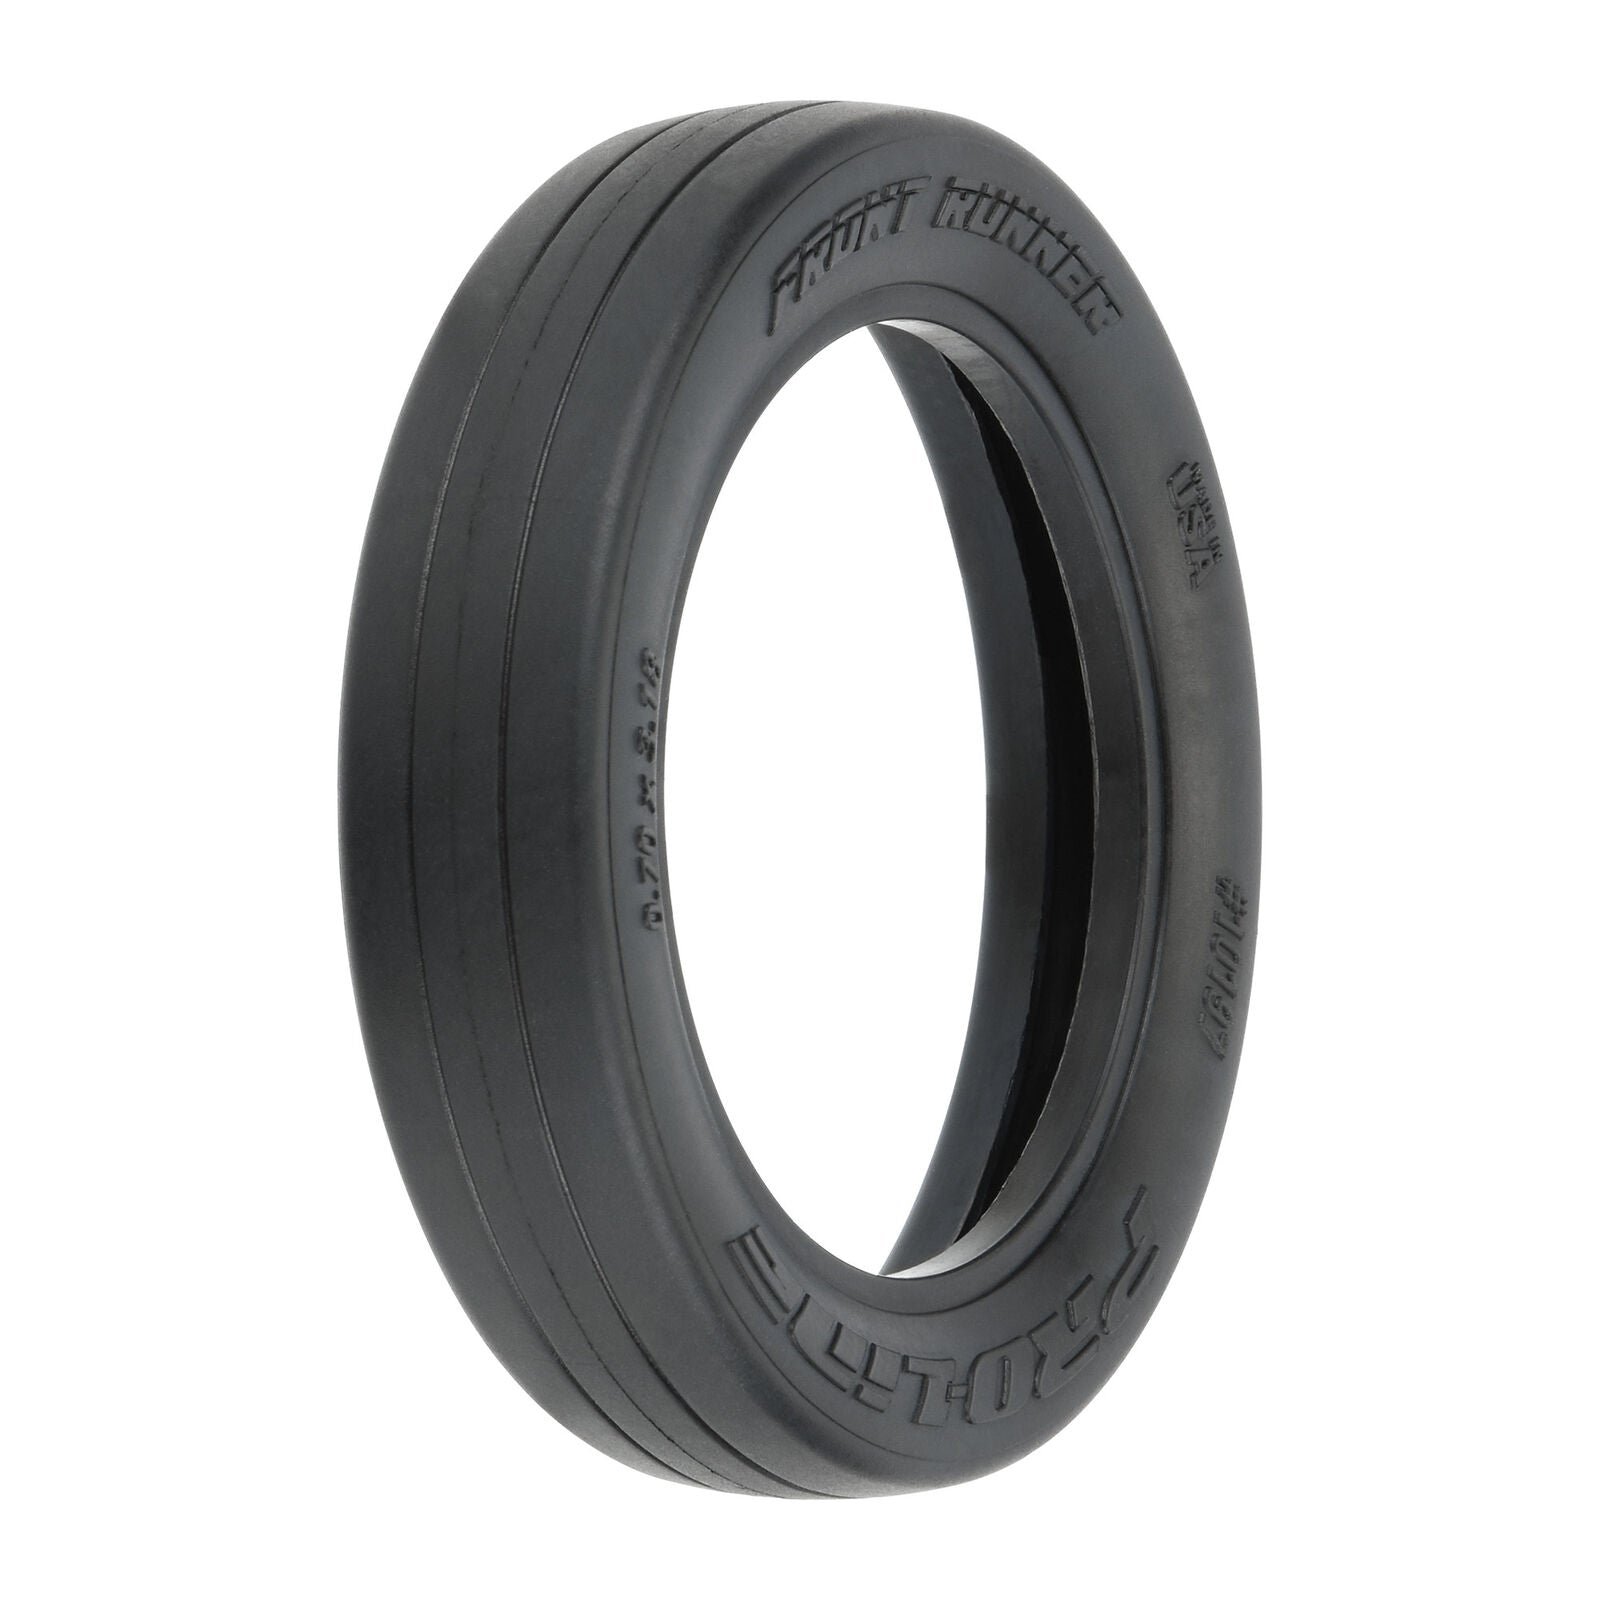 PROLINE 10197-203 1/10 Front Runner S3 2WD Front 2.2"/2.7" Drag Racing Tire (2)